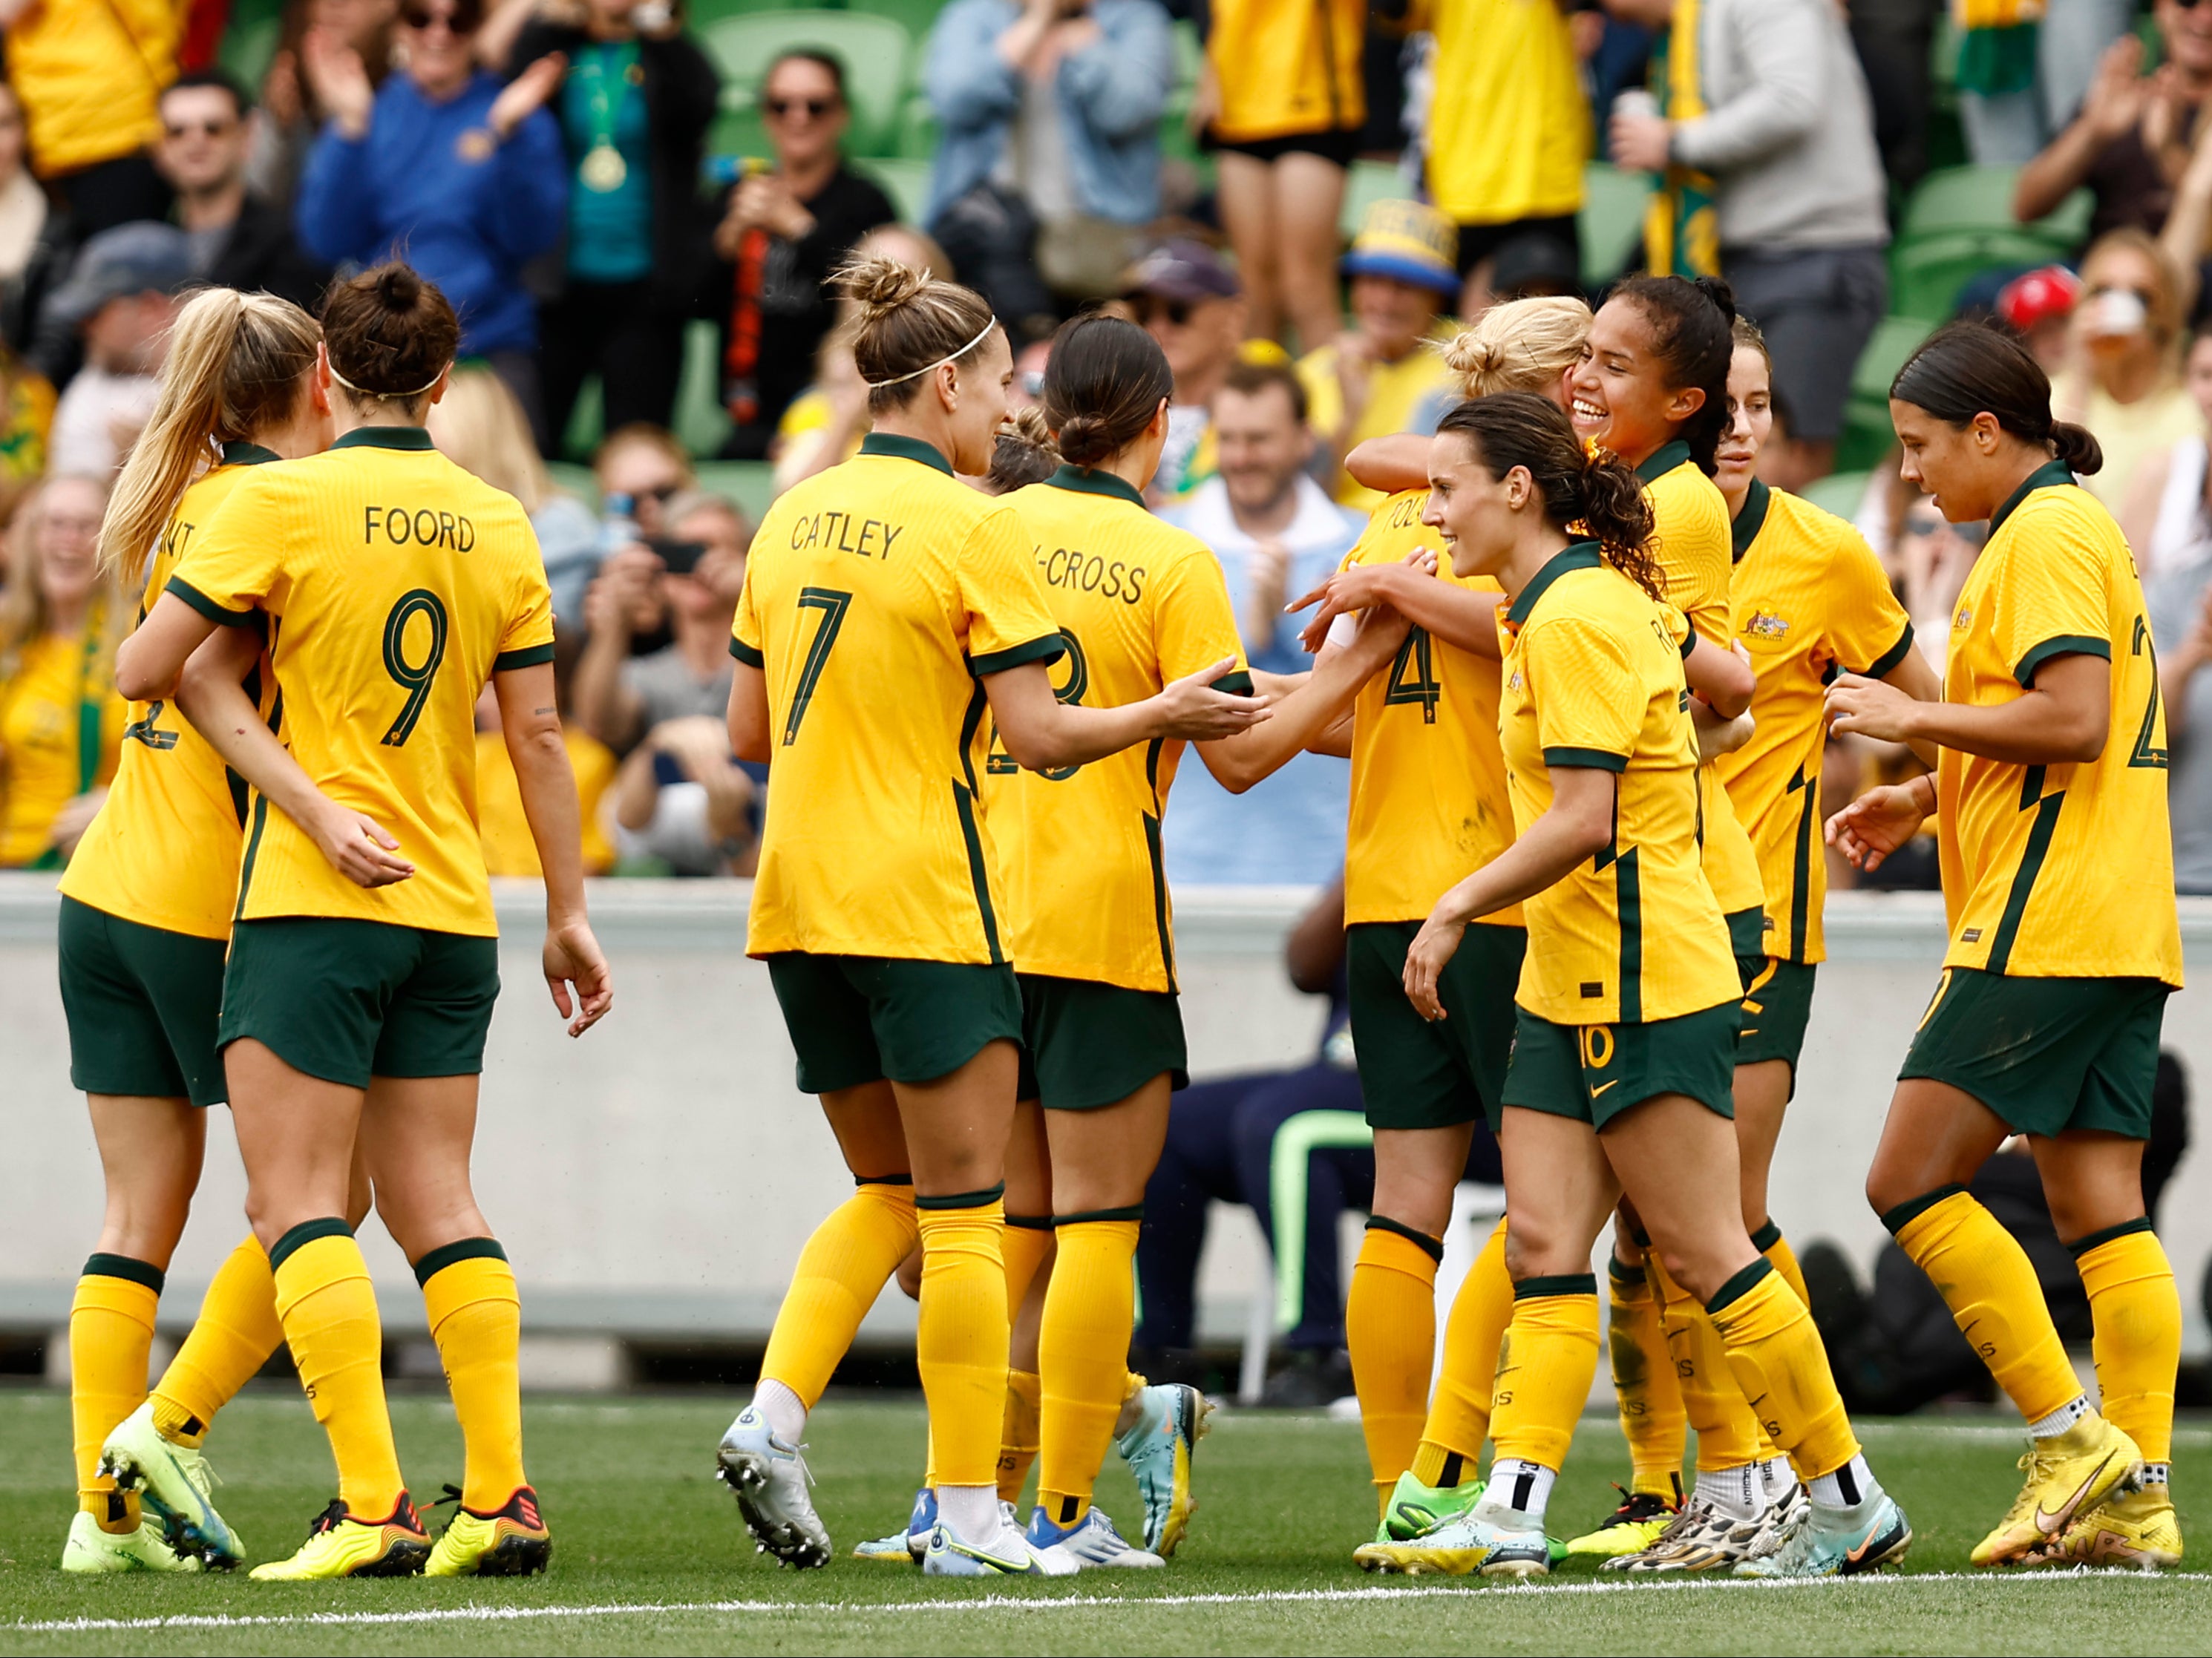 Australia’s Women’s World Cup opening game moved to bigger venue The